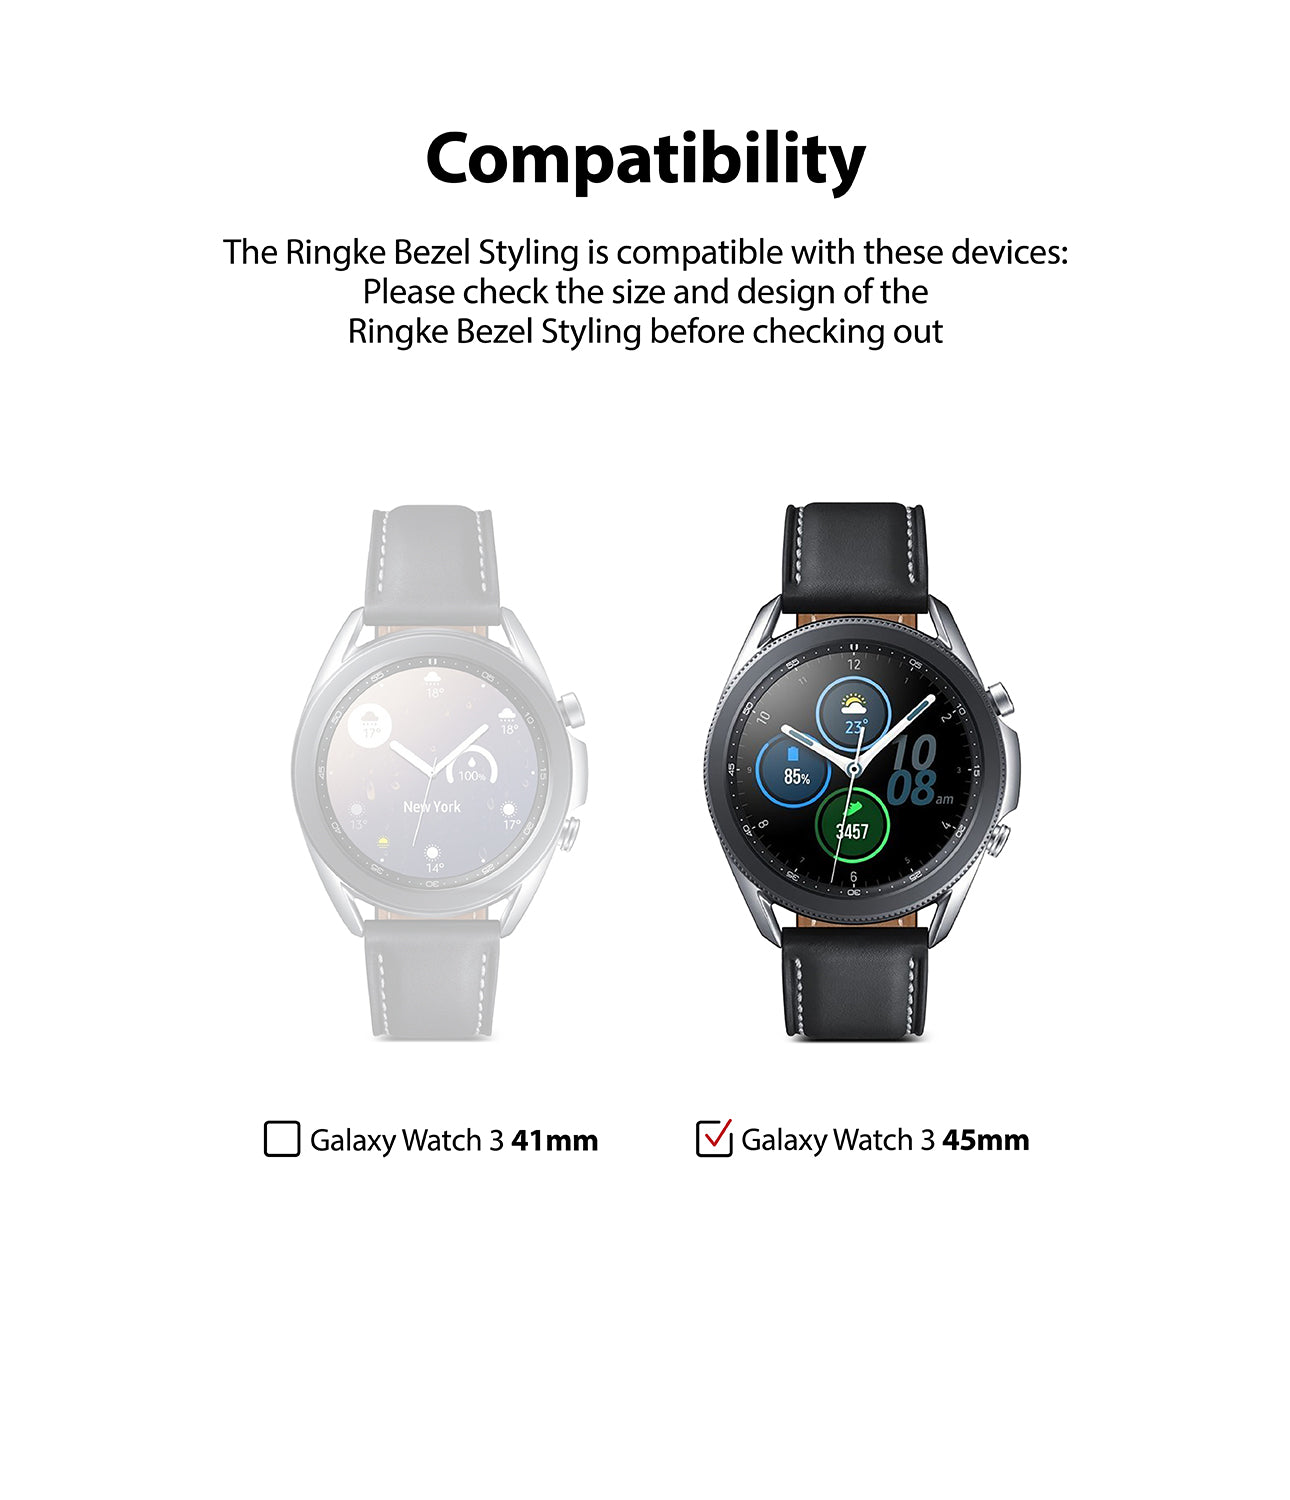 only compatible with galaxy watch 3 45mm